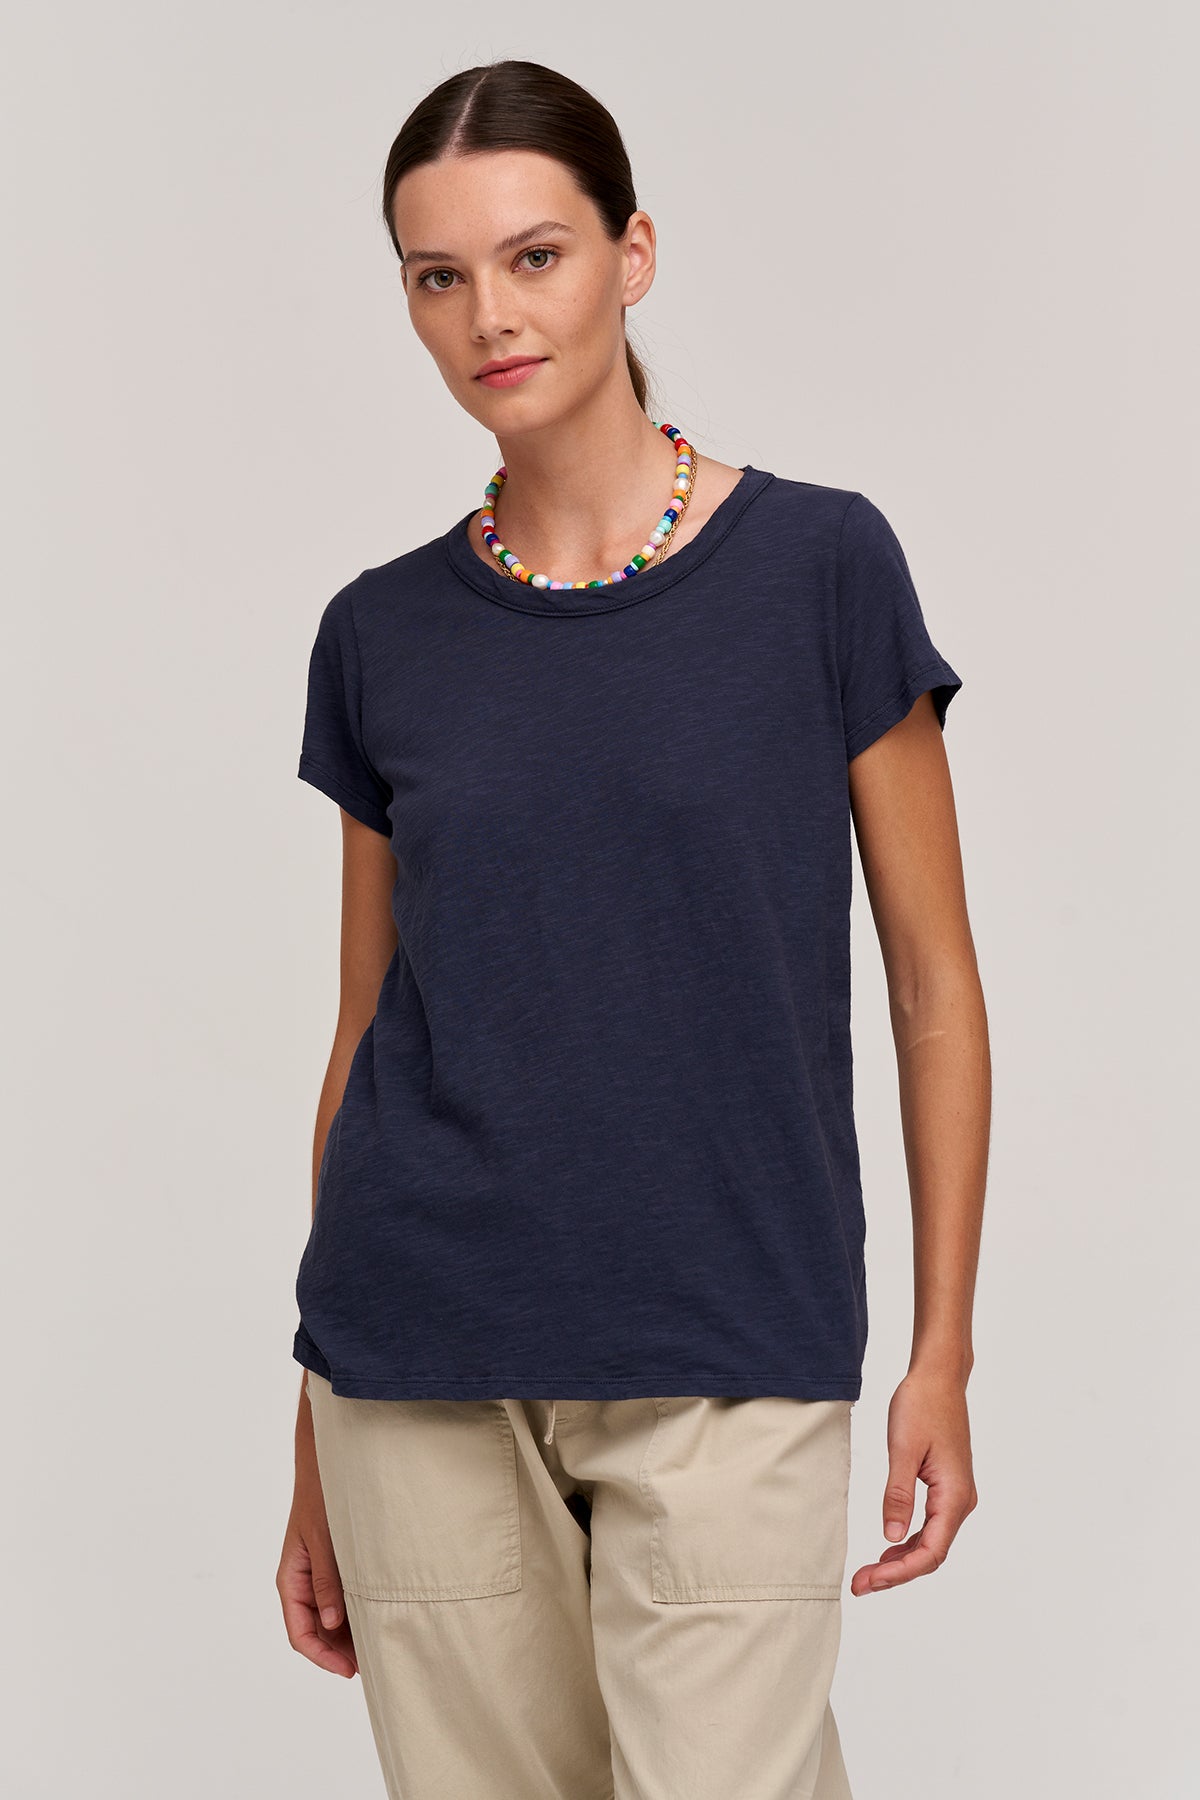   a woman wearing a navy TILLY ORIGINAL SLUB CREW NECK TEE by Velvet by Graham & Spencer and khaki pants. 